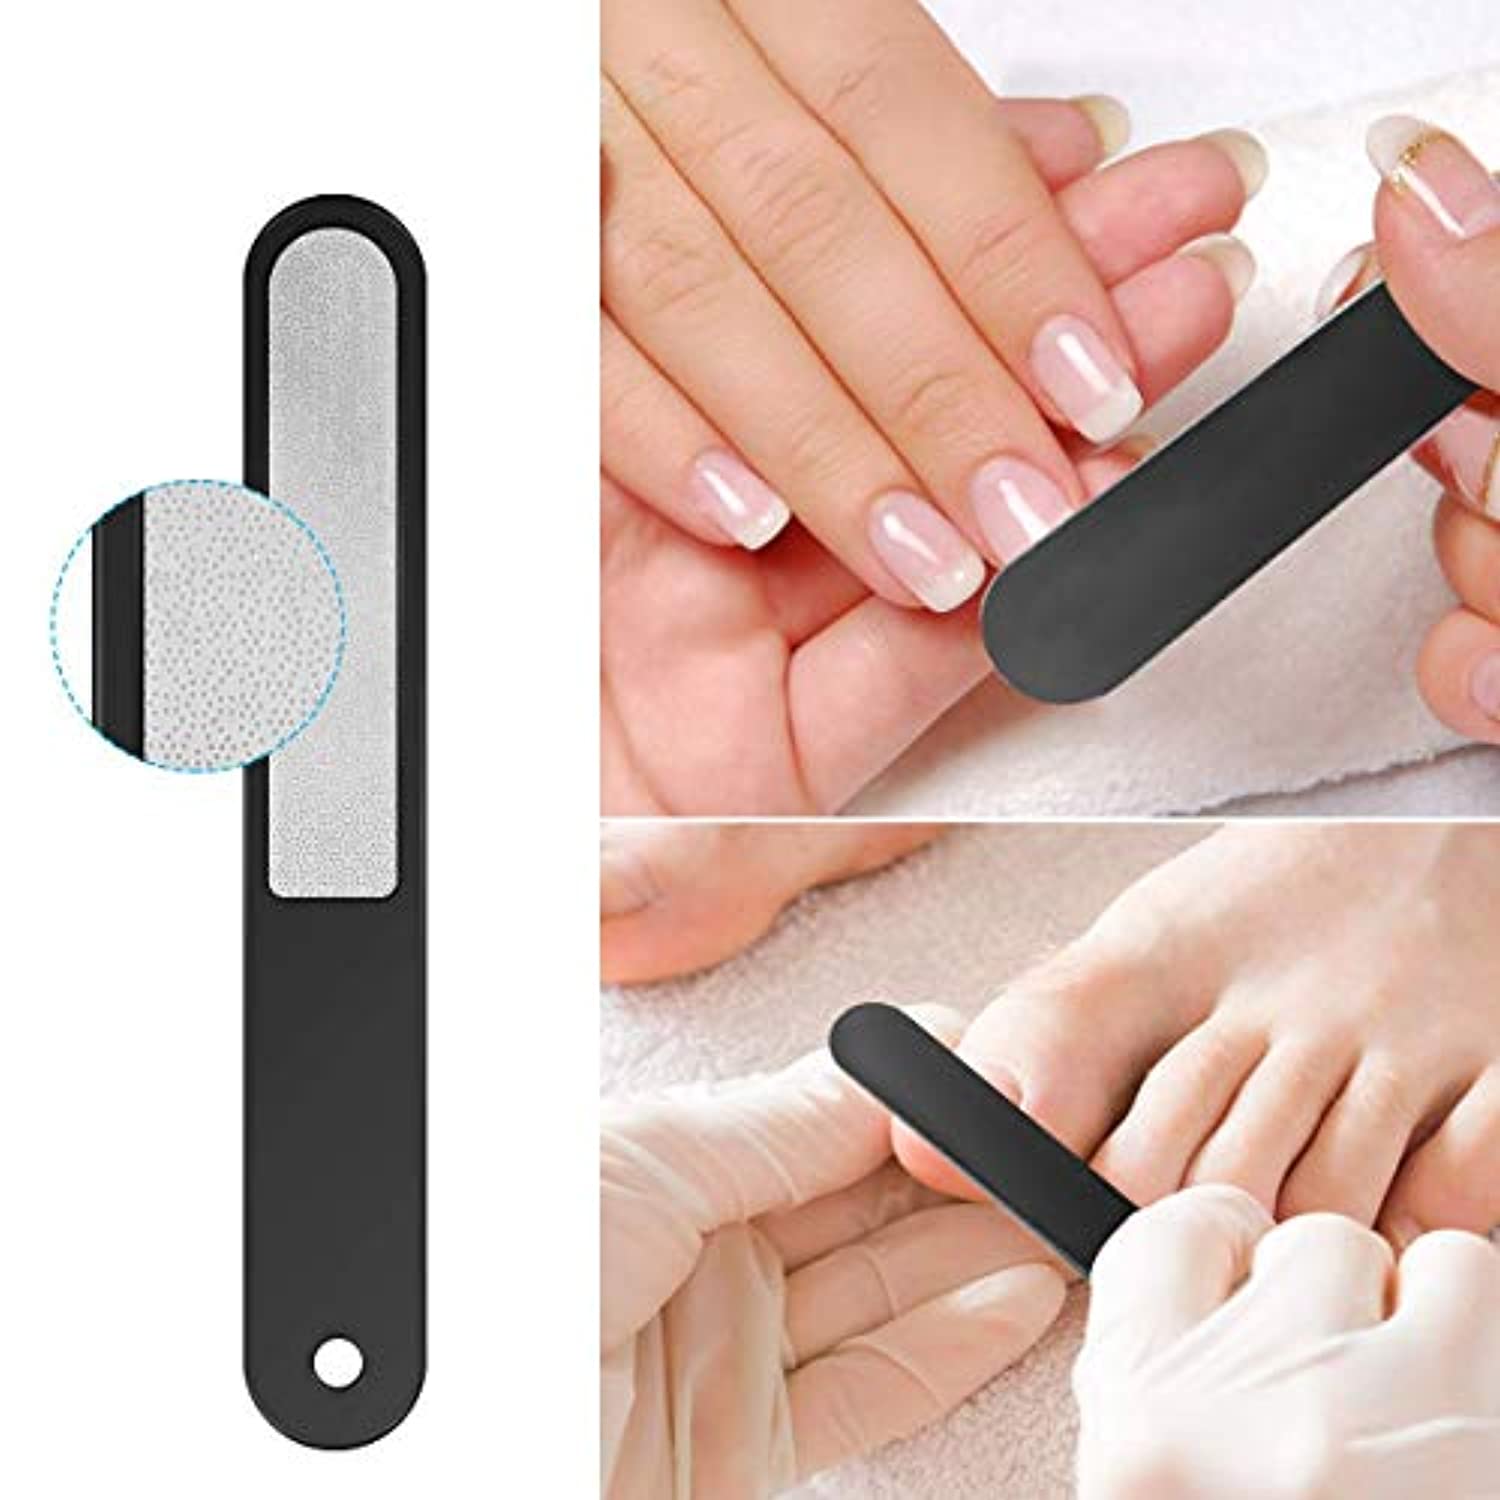 15mm Wide Jaw Opening Deluxe Sturdy Stainless Steel Fingernail Clippers Toenail Clippers for Thick Nails Big Size